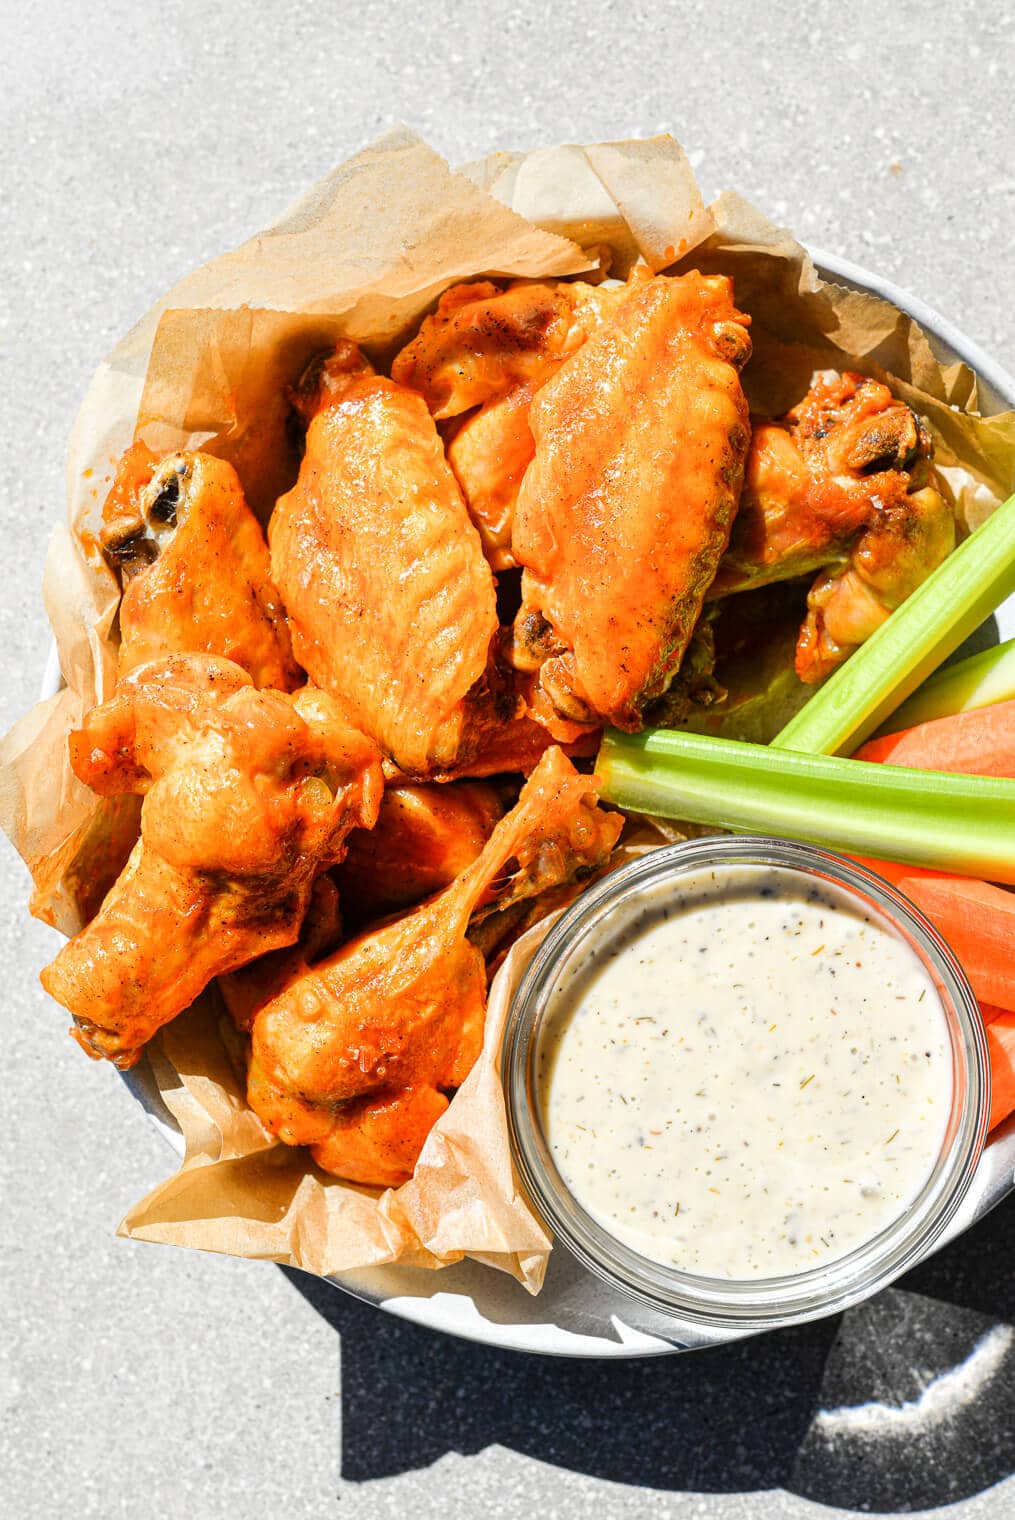 a bowl filled with Instant Pot buffalo chicken wings, carrots, celery, and a small dish of ranch dressing sitting on a gray background